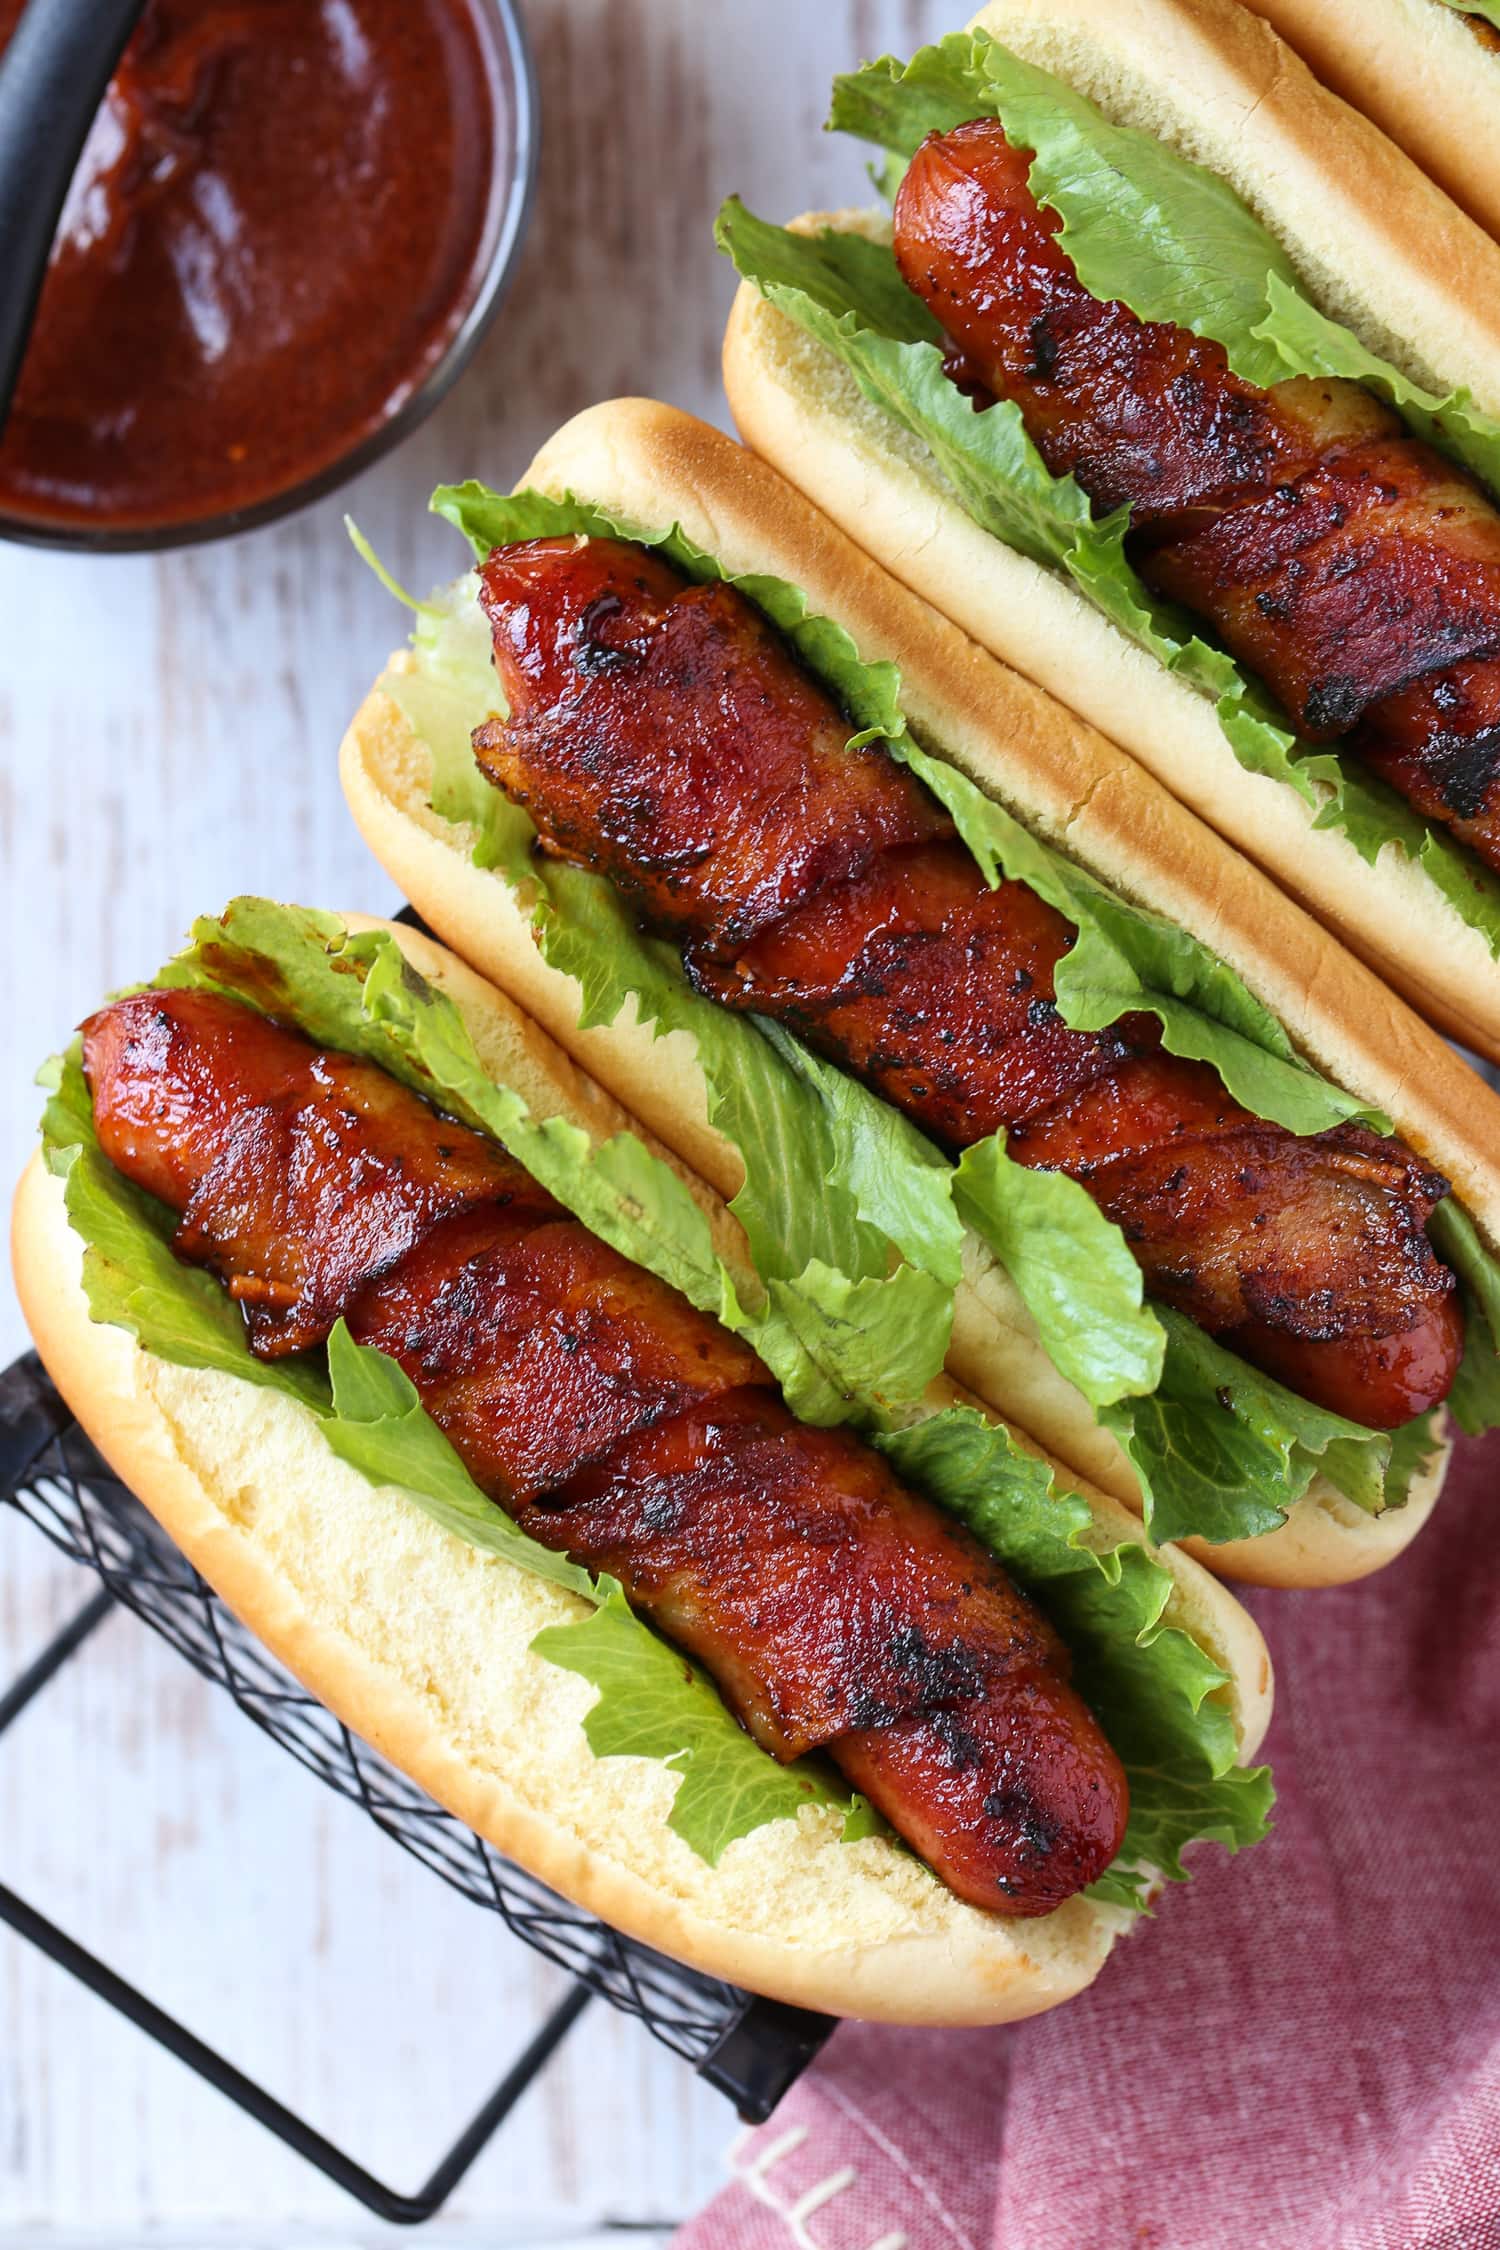 hot dogs wrapped with bacon on buns with lettuce